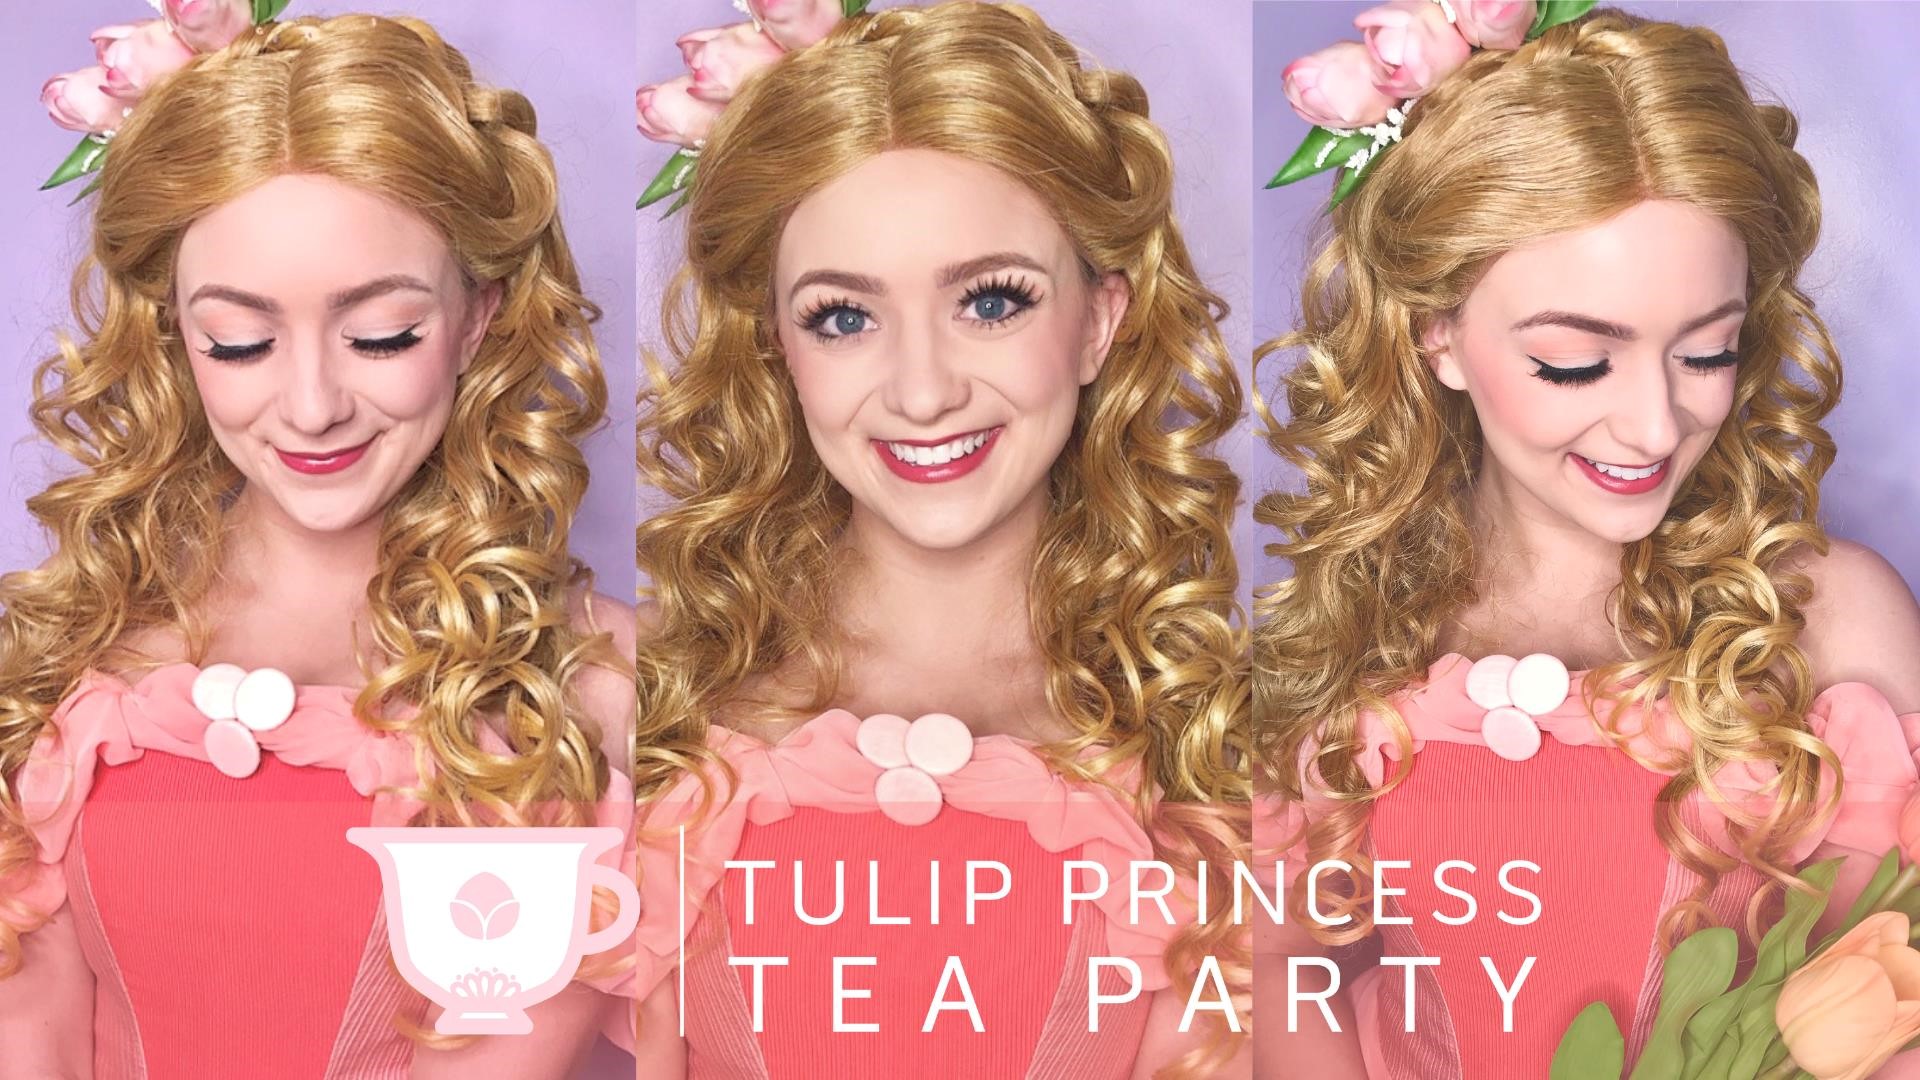 This year Tulip Time is hosting tea parties with Lida the Tulip Princess and her princess friends.   They take place Sunday, May 5 at 11 a.m. and 2 p.m.